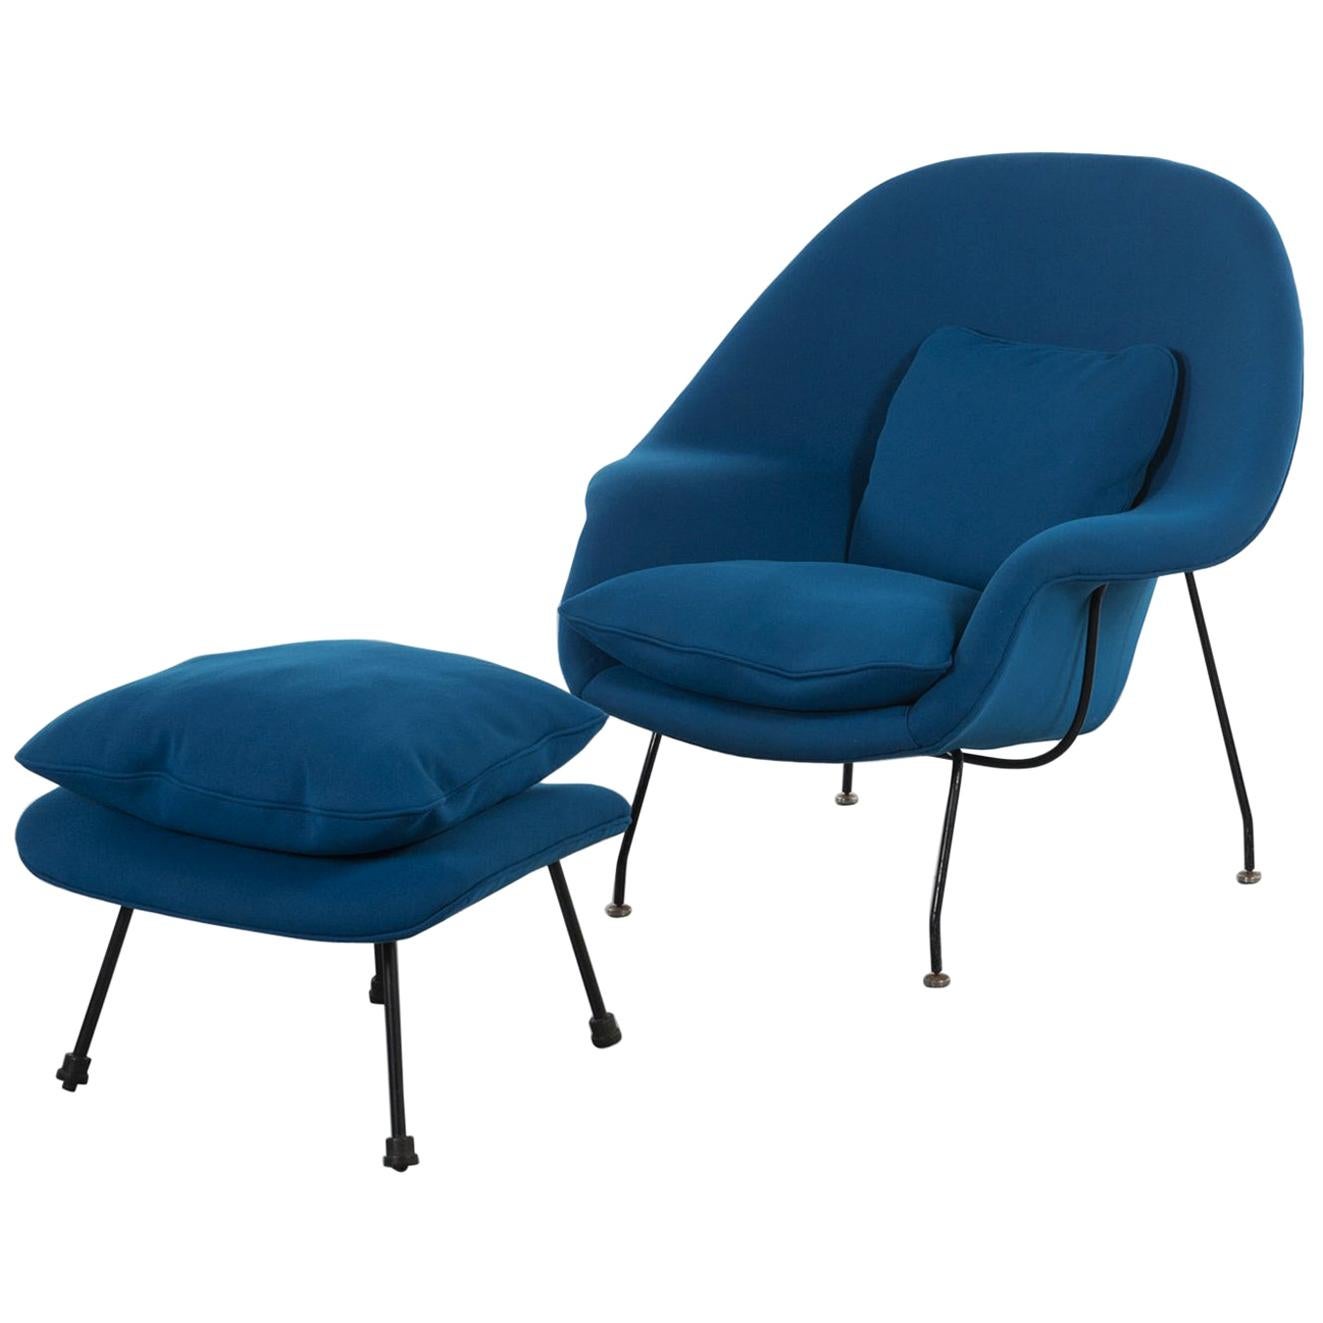 Womb Chair and ottoman by Eero Saarinen Produced by Knoll First Edition, Europe